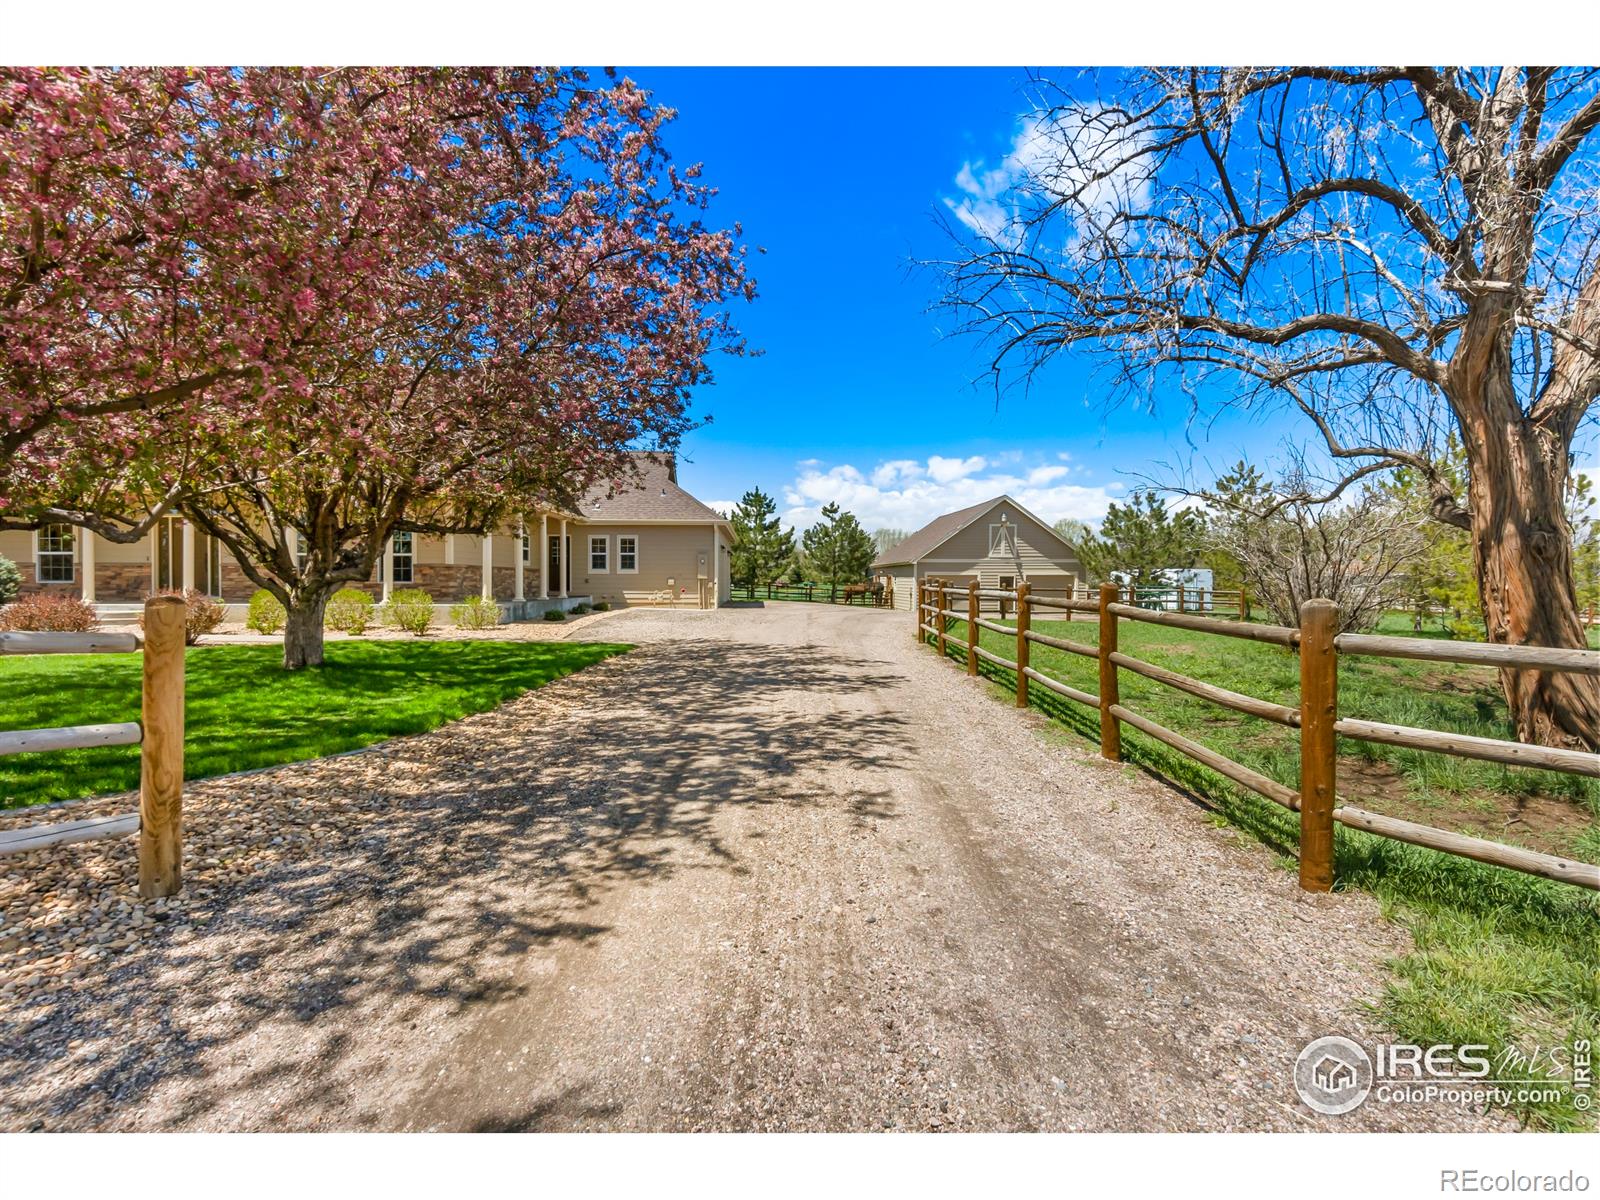 Report Image for 3325  Turnberry Road,Fort Collins, Colorado